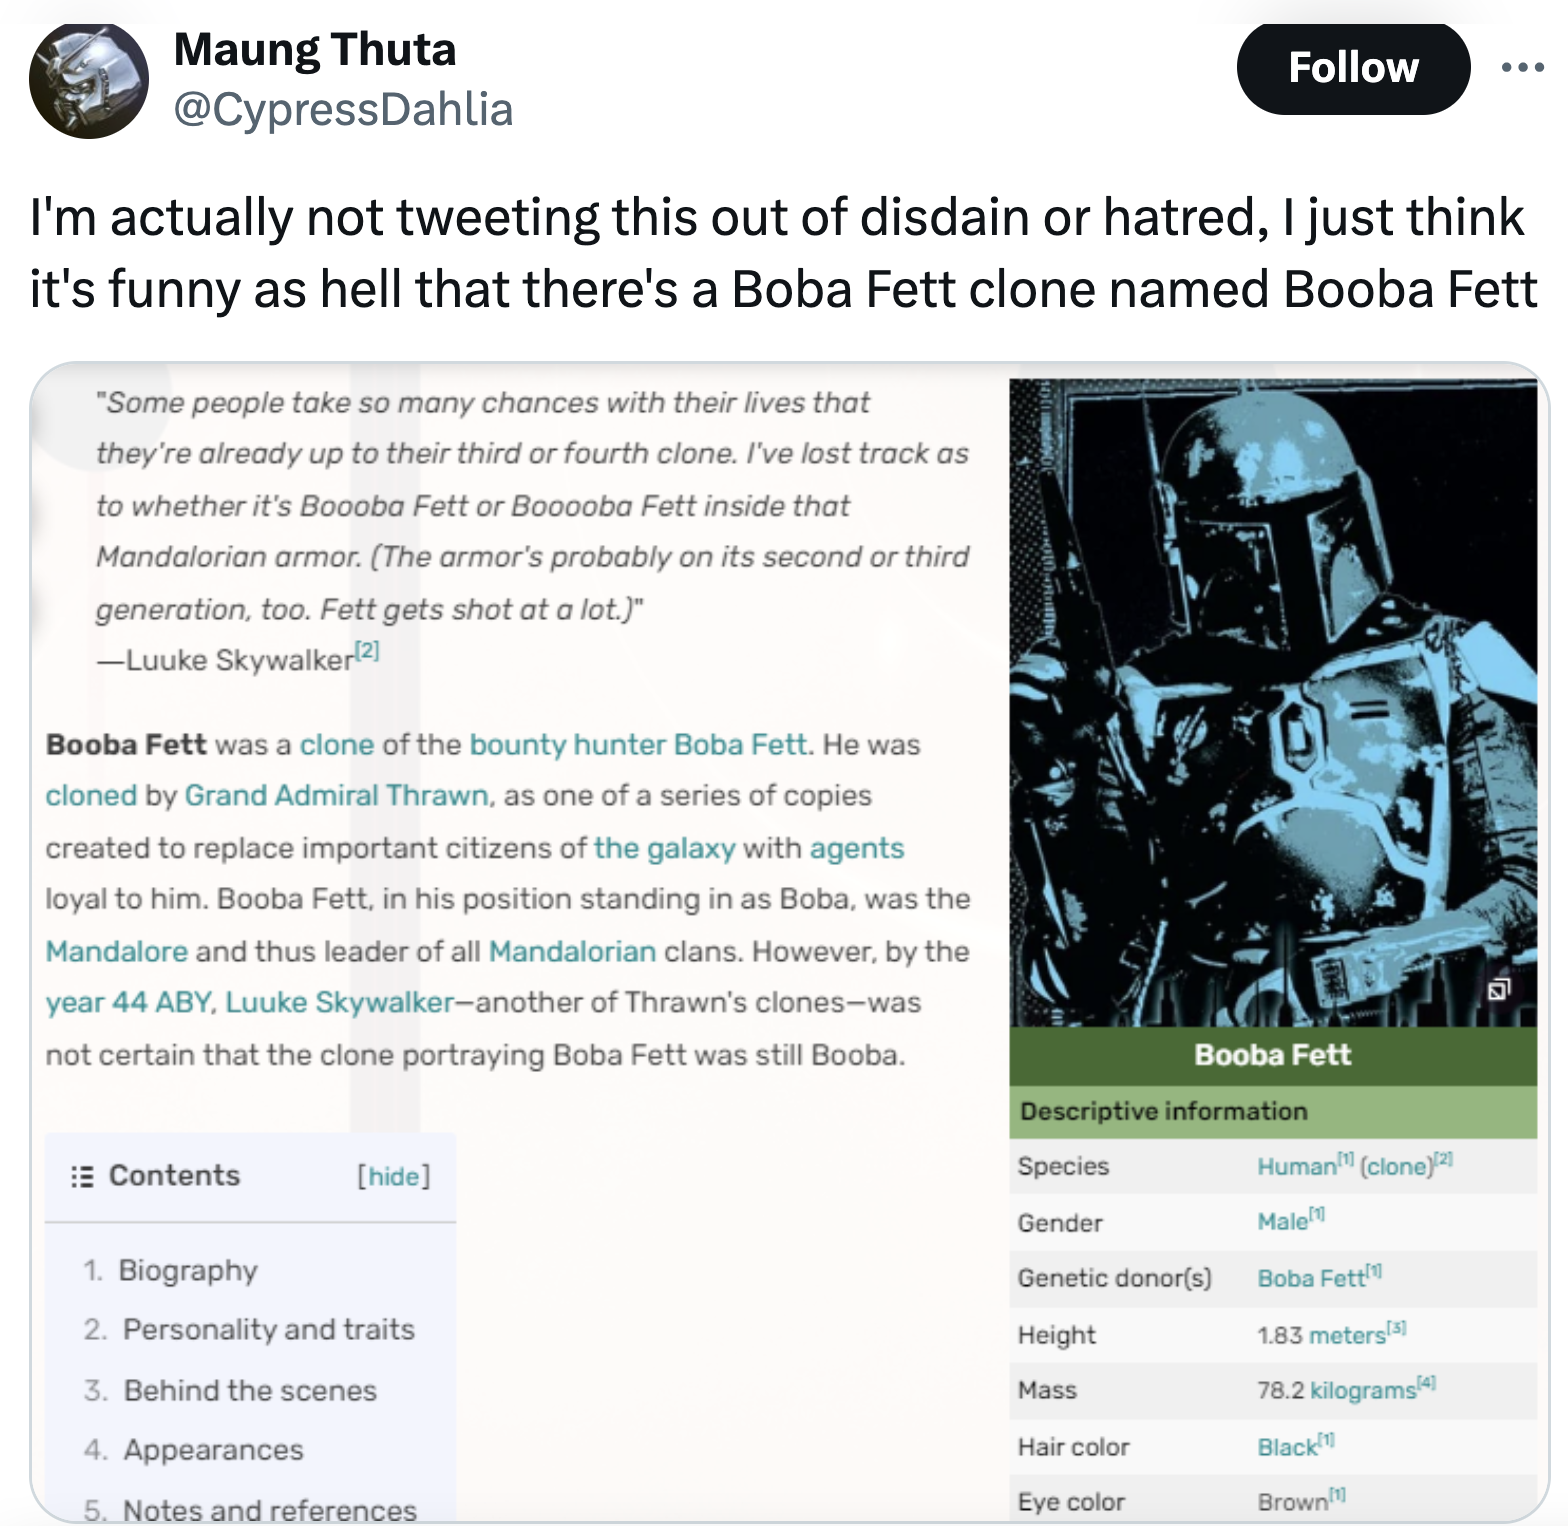 web page - Maung Thuta Dahlia I'm actually not tweeting this out of disdain or hatred, I just think it's funny as hell that there's a Boba Fett clone named Booba Fett "Some people take so many chances with their lives that they're already up to their thir